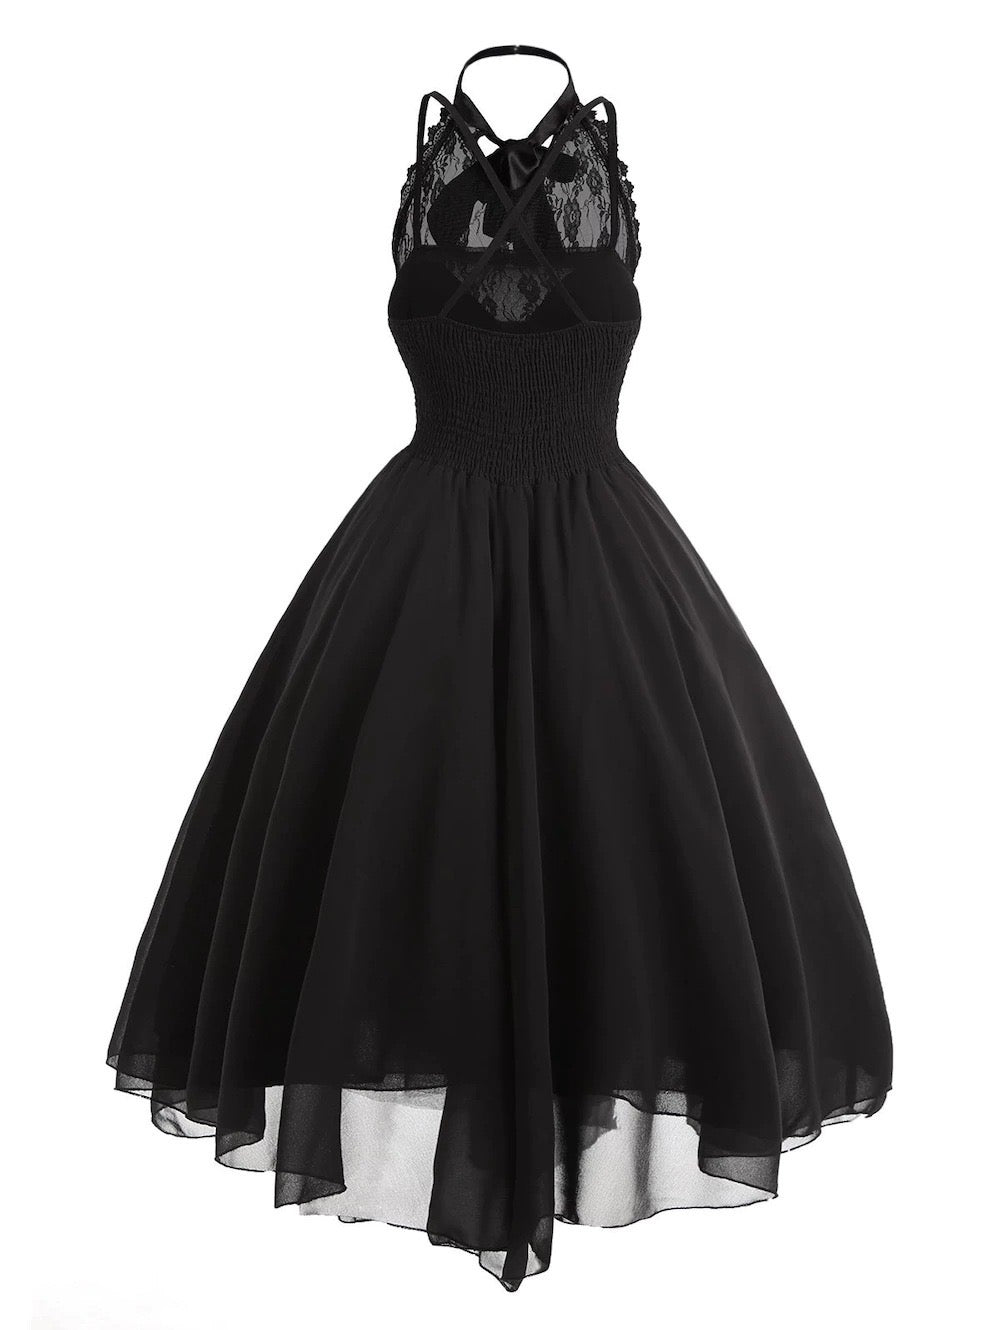 Gothic Dress Sleeveless with Corset Halter Lace Swing Cocktail Dress